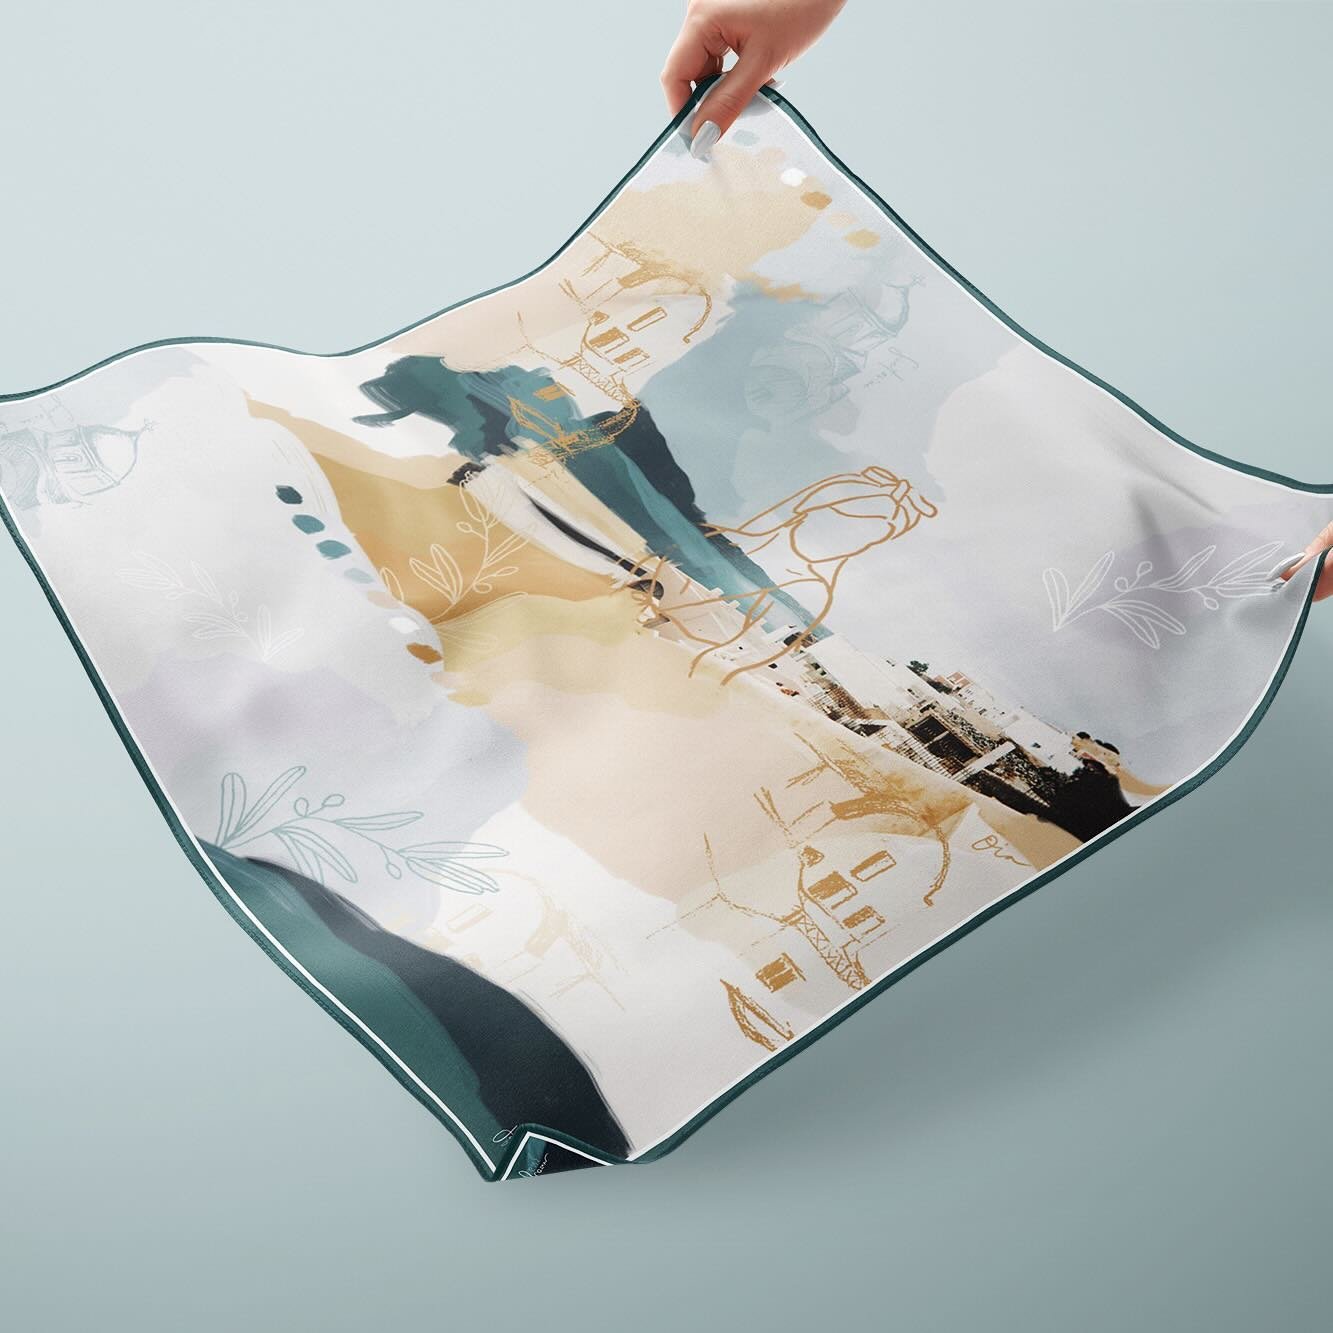 This square Chiffon scarf is now available on my website! Get in quick as there are only 2 left! 

This artwork is made up of a film photo I took in Santorini, some sketches I made perched along the cliff side and an abstraction of the colours of the